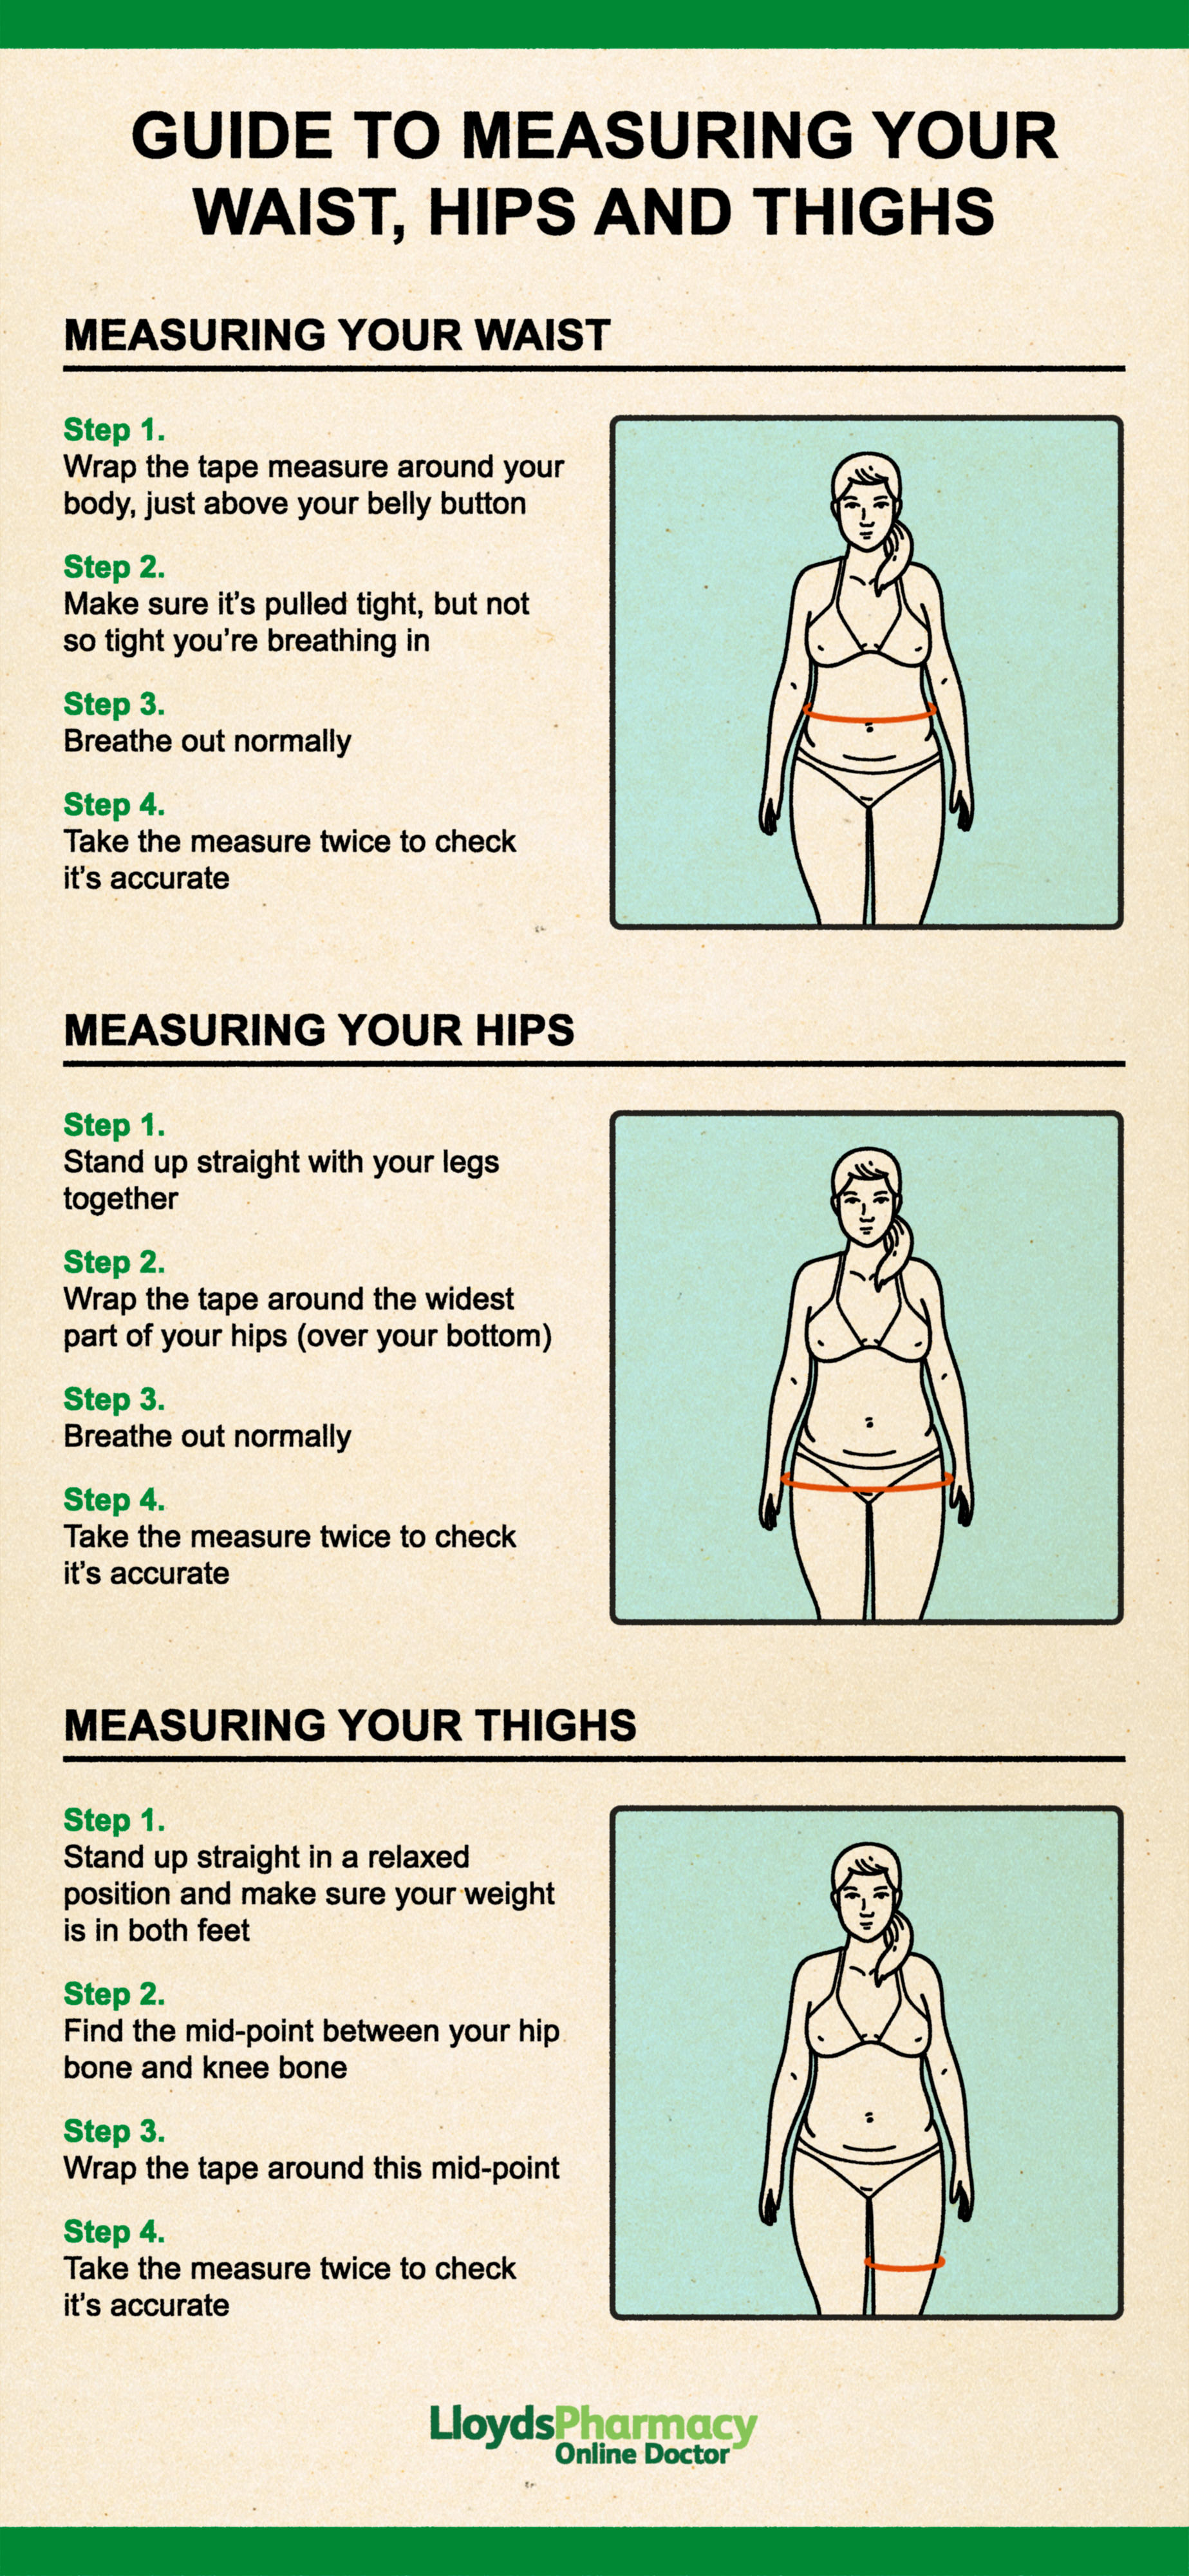 Guide to Measuring Your Waist, Hips And Thighs